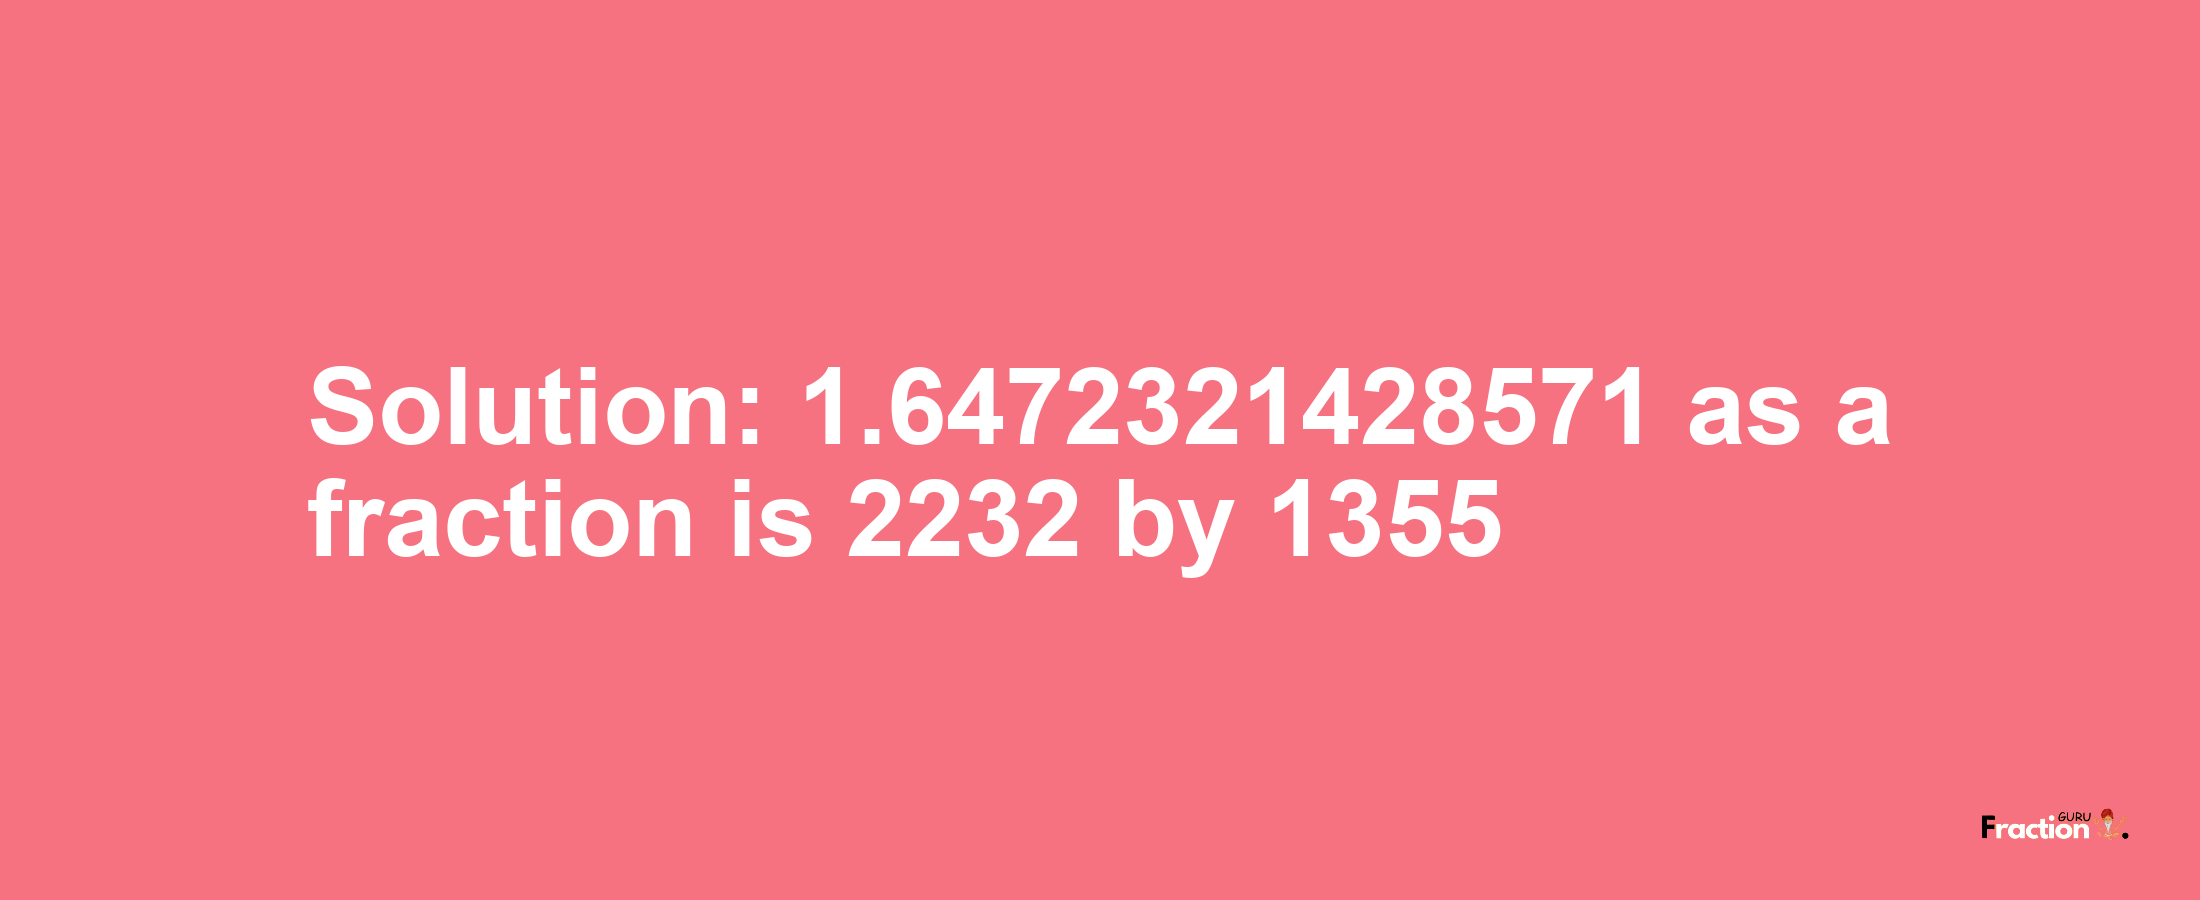 Solution:1.6472321428571 as a fraction is 2232/1355